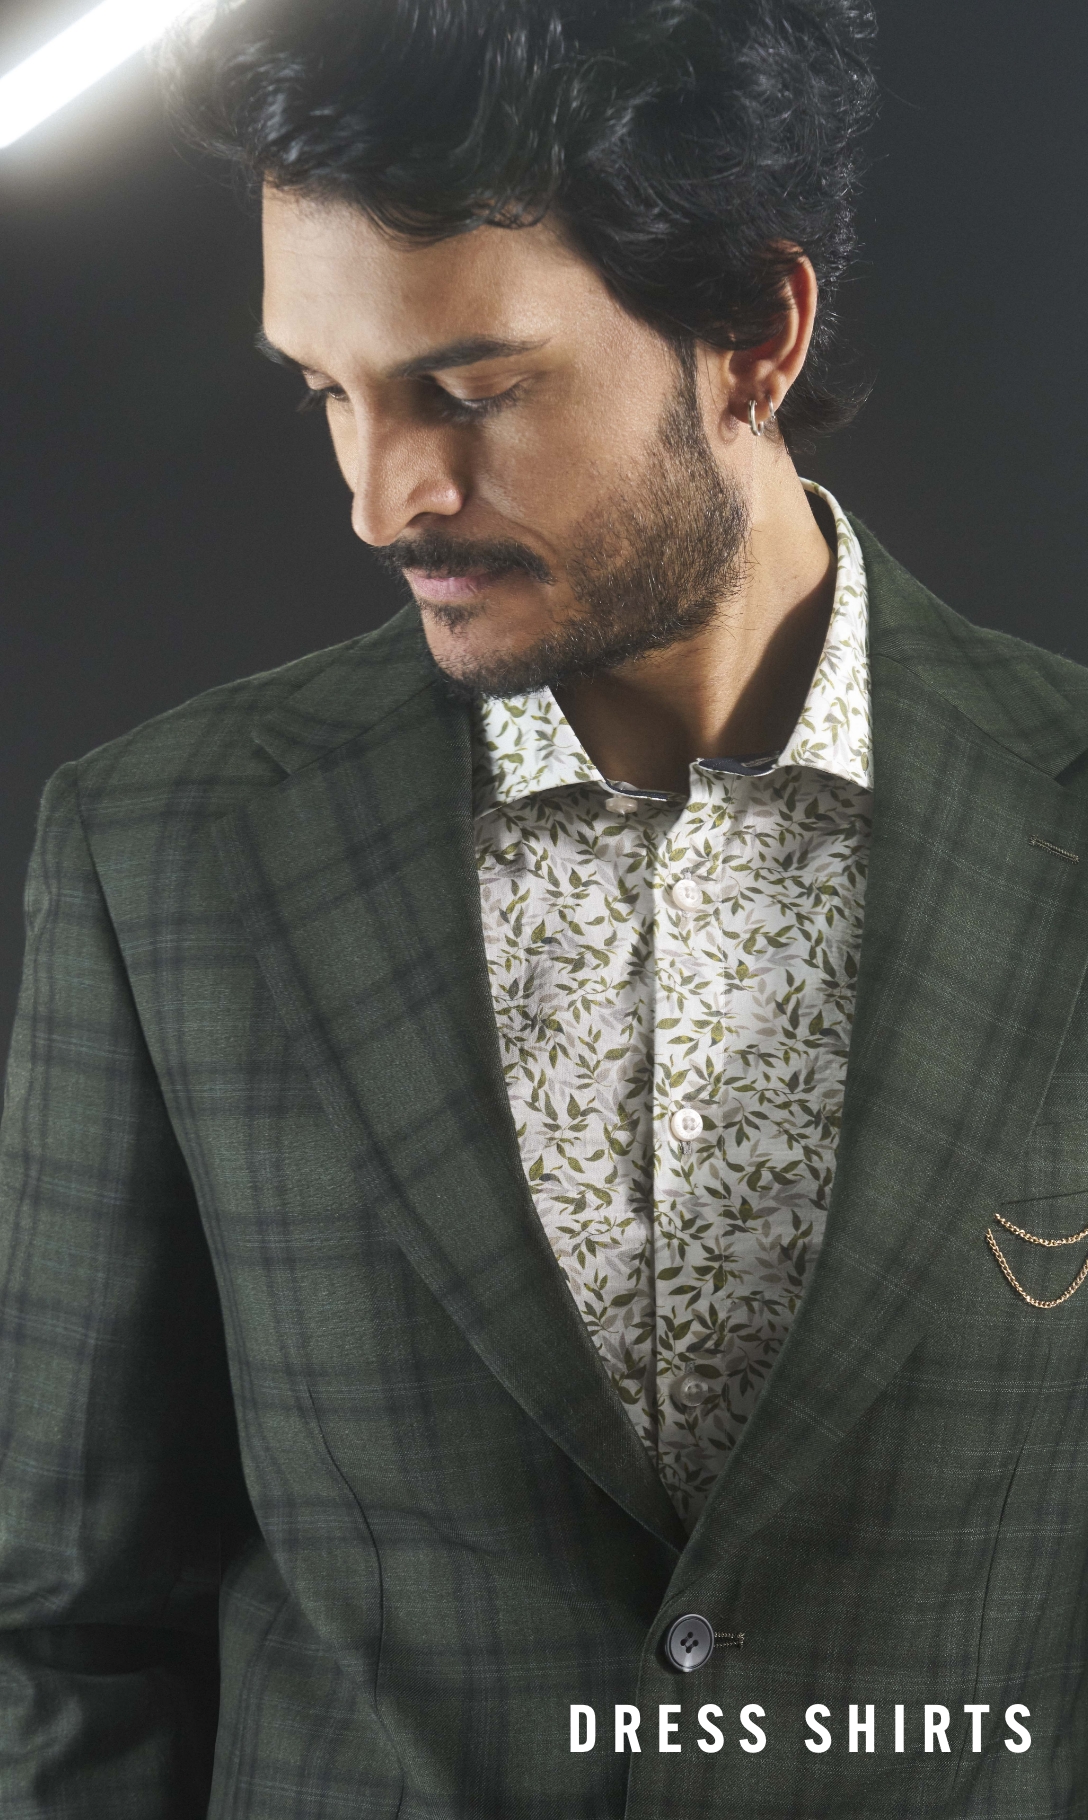 Dress Shirts category. Image features a green and white leaf print dress shirt. 